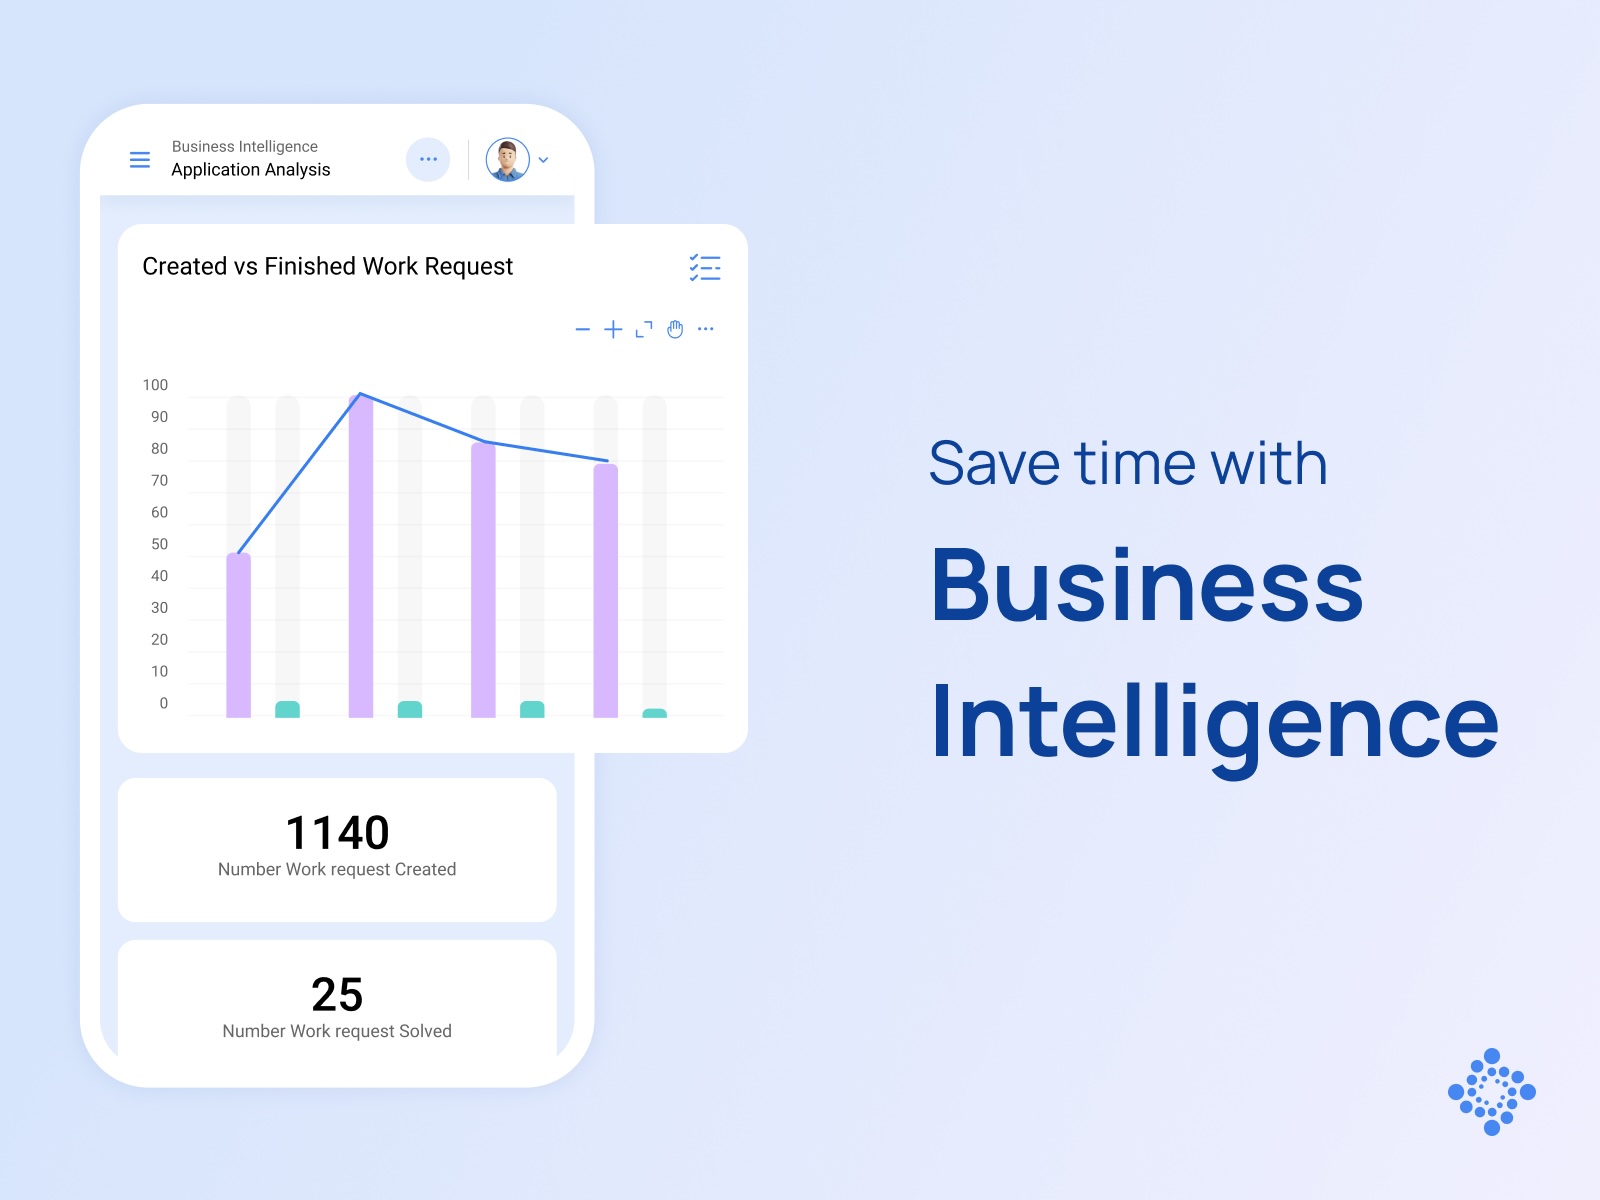 Save time with business intelligence.